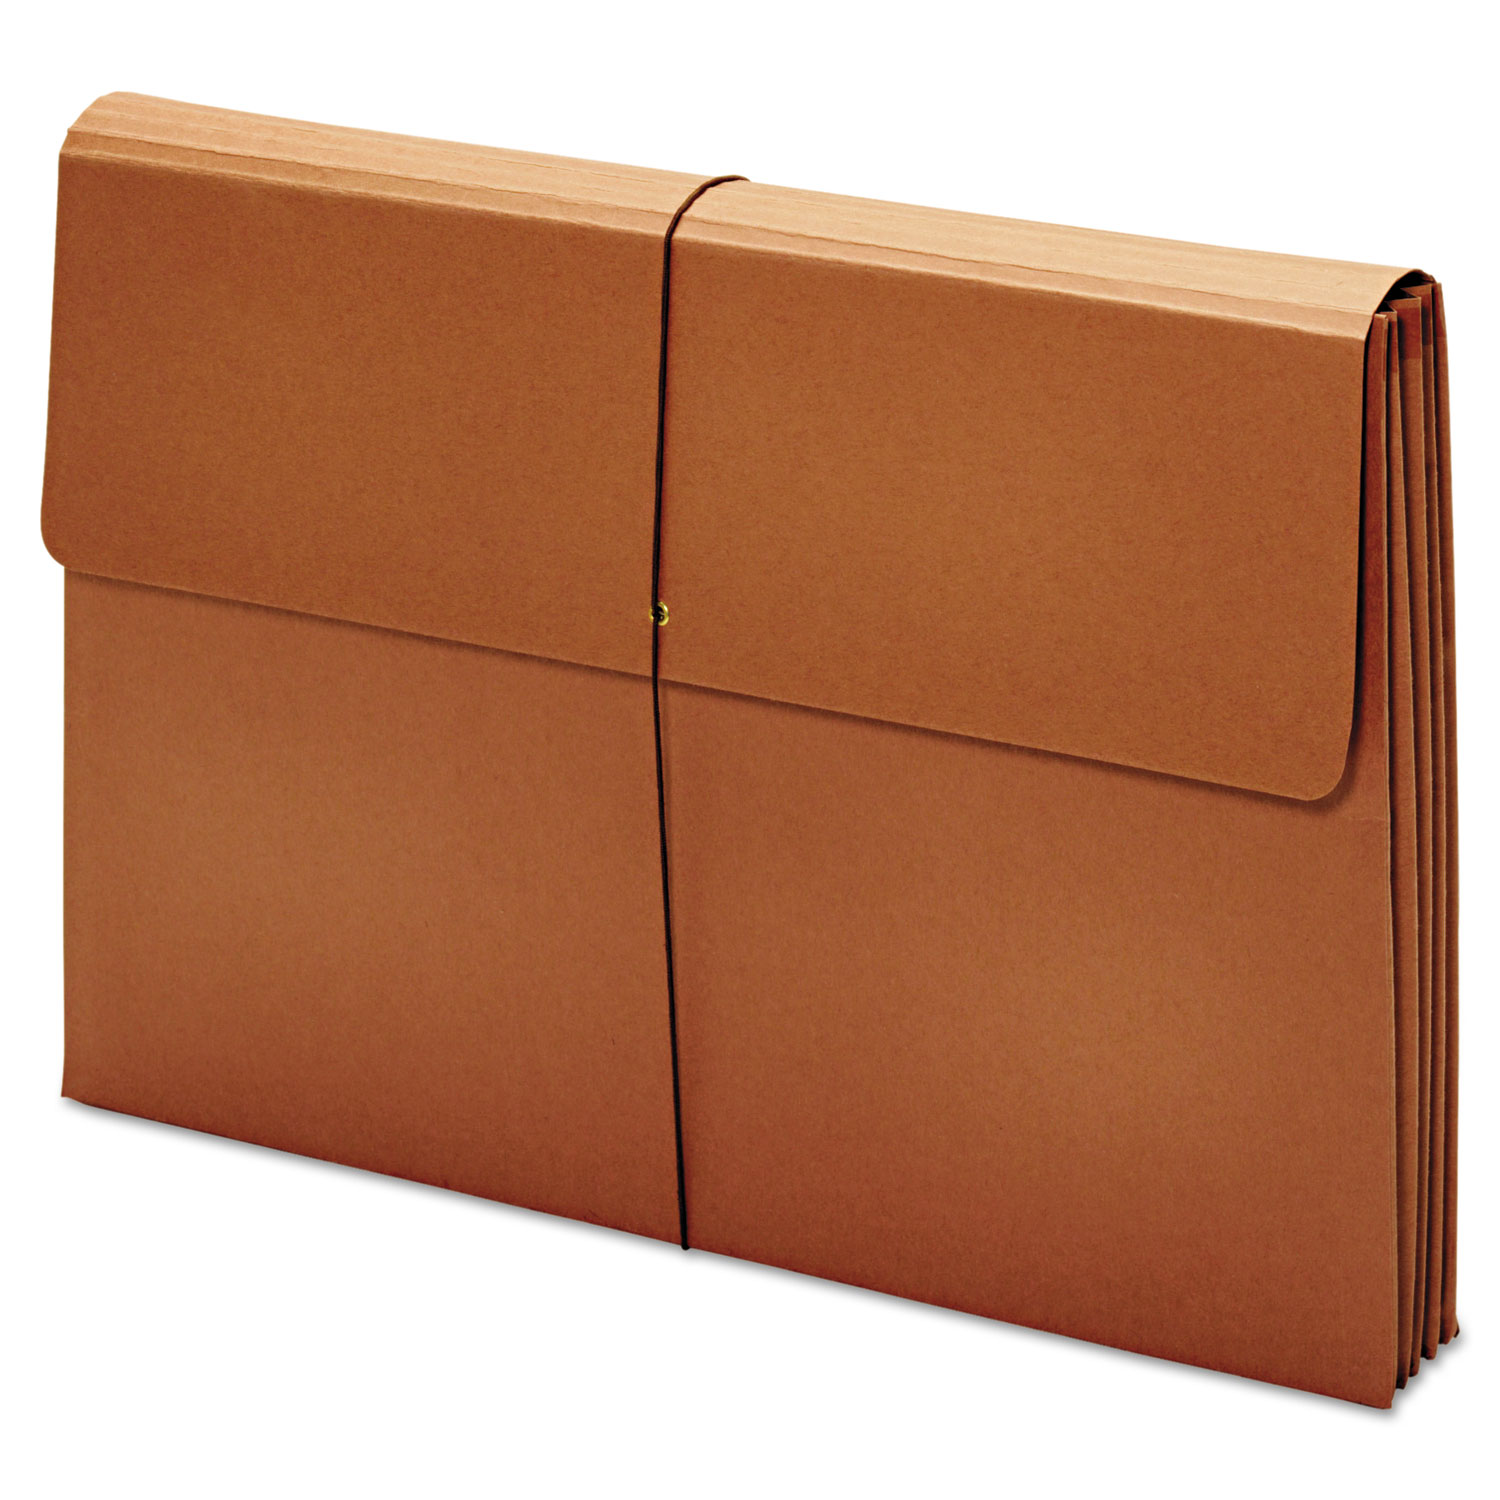 Expanding Wallet, 3 1/2 Inch Expansion, 12 x 18, Brown